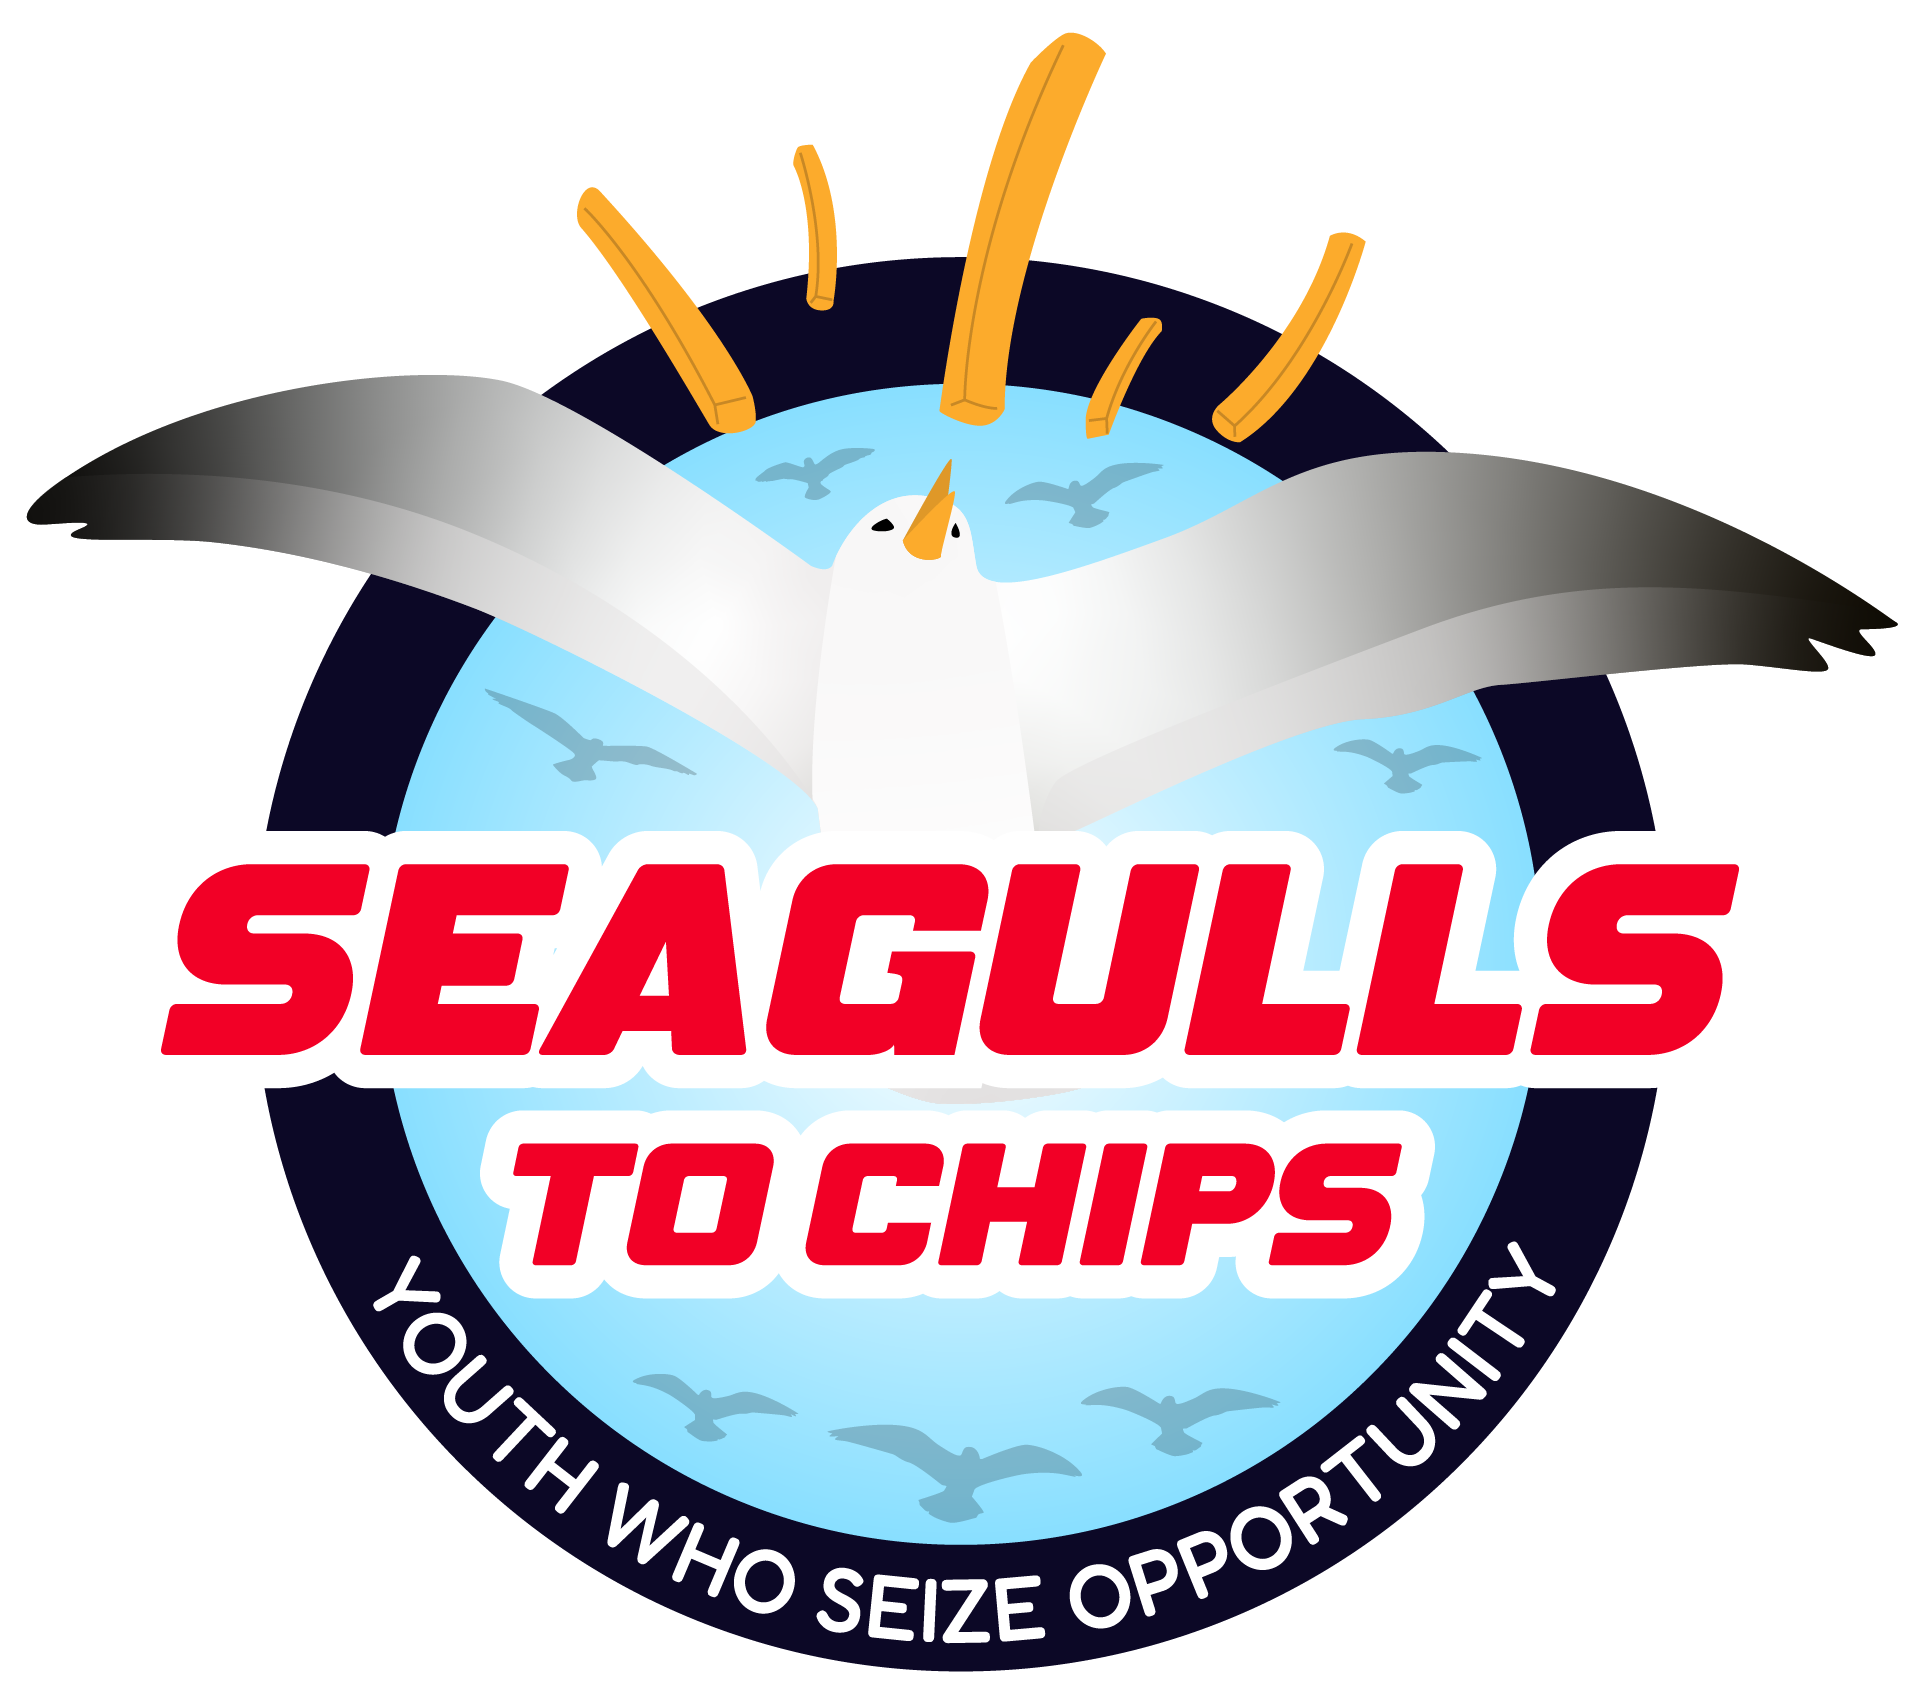 Seagulls to Chips youth leadership program - Application Form - Future ...